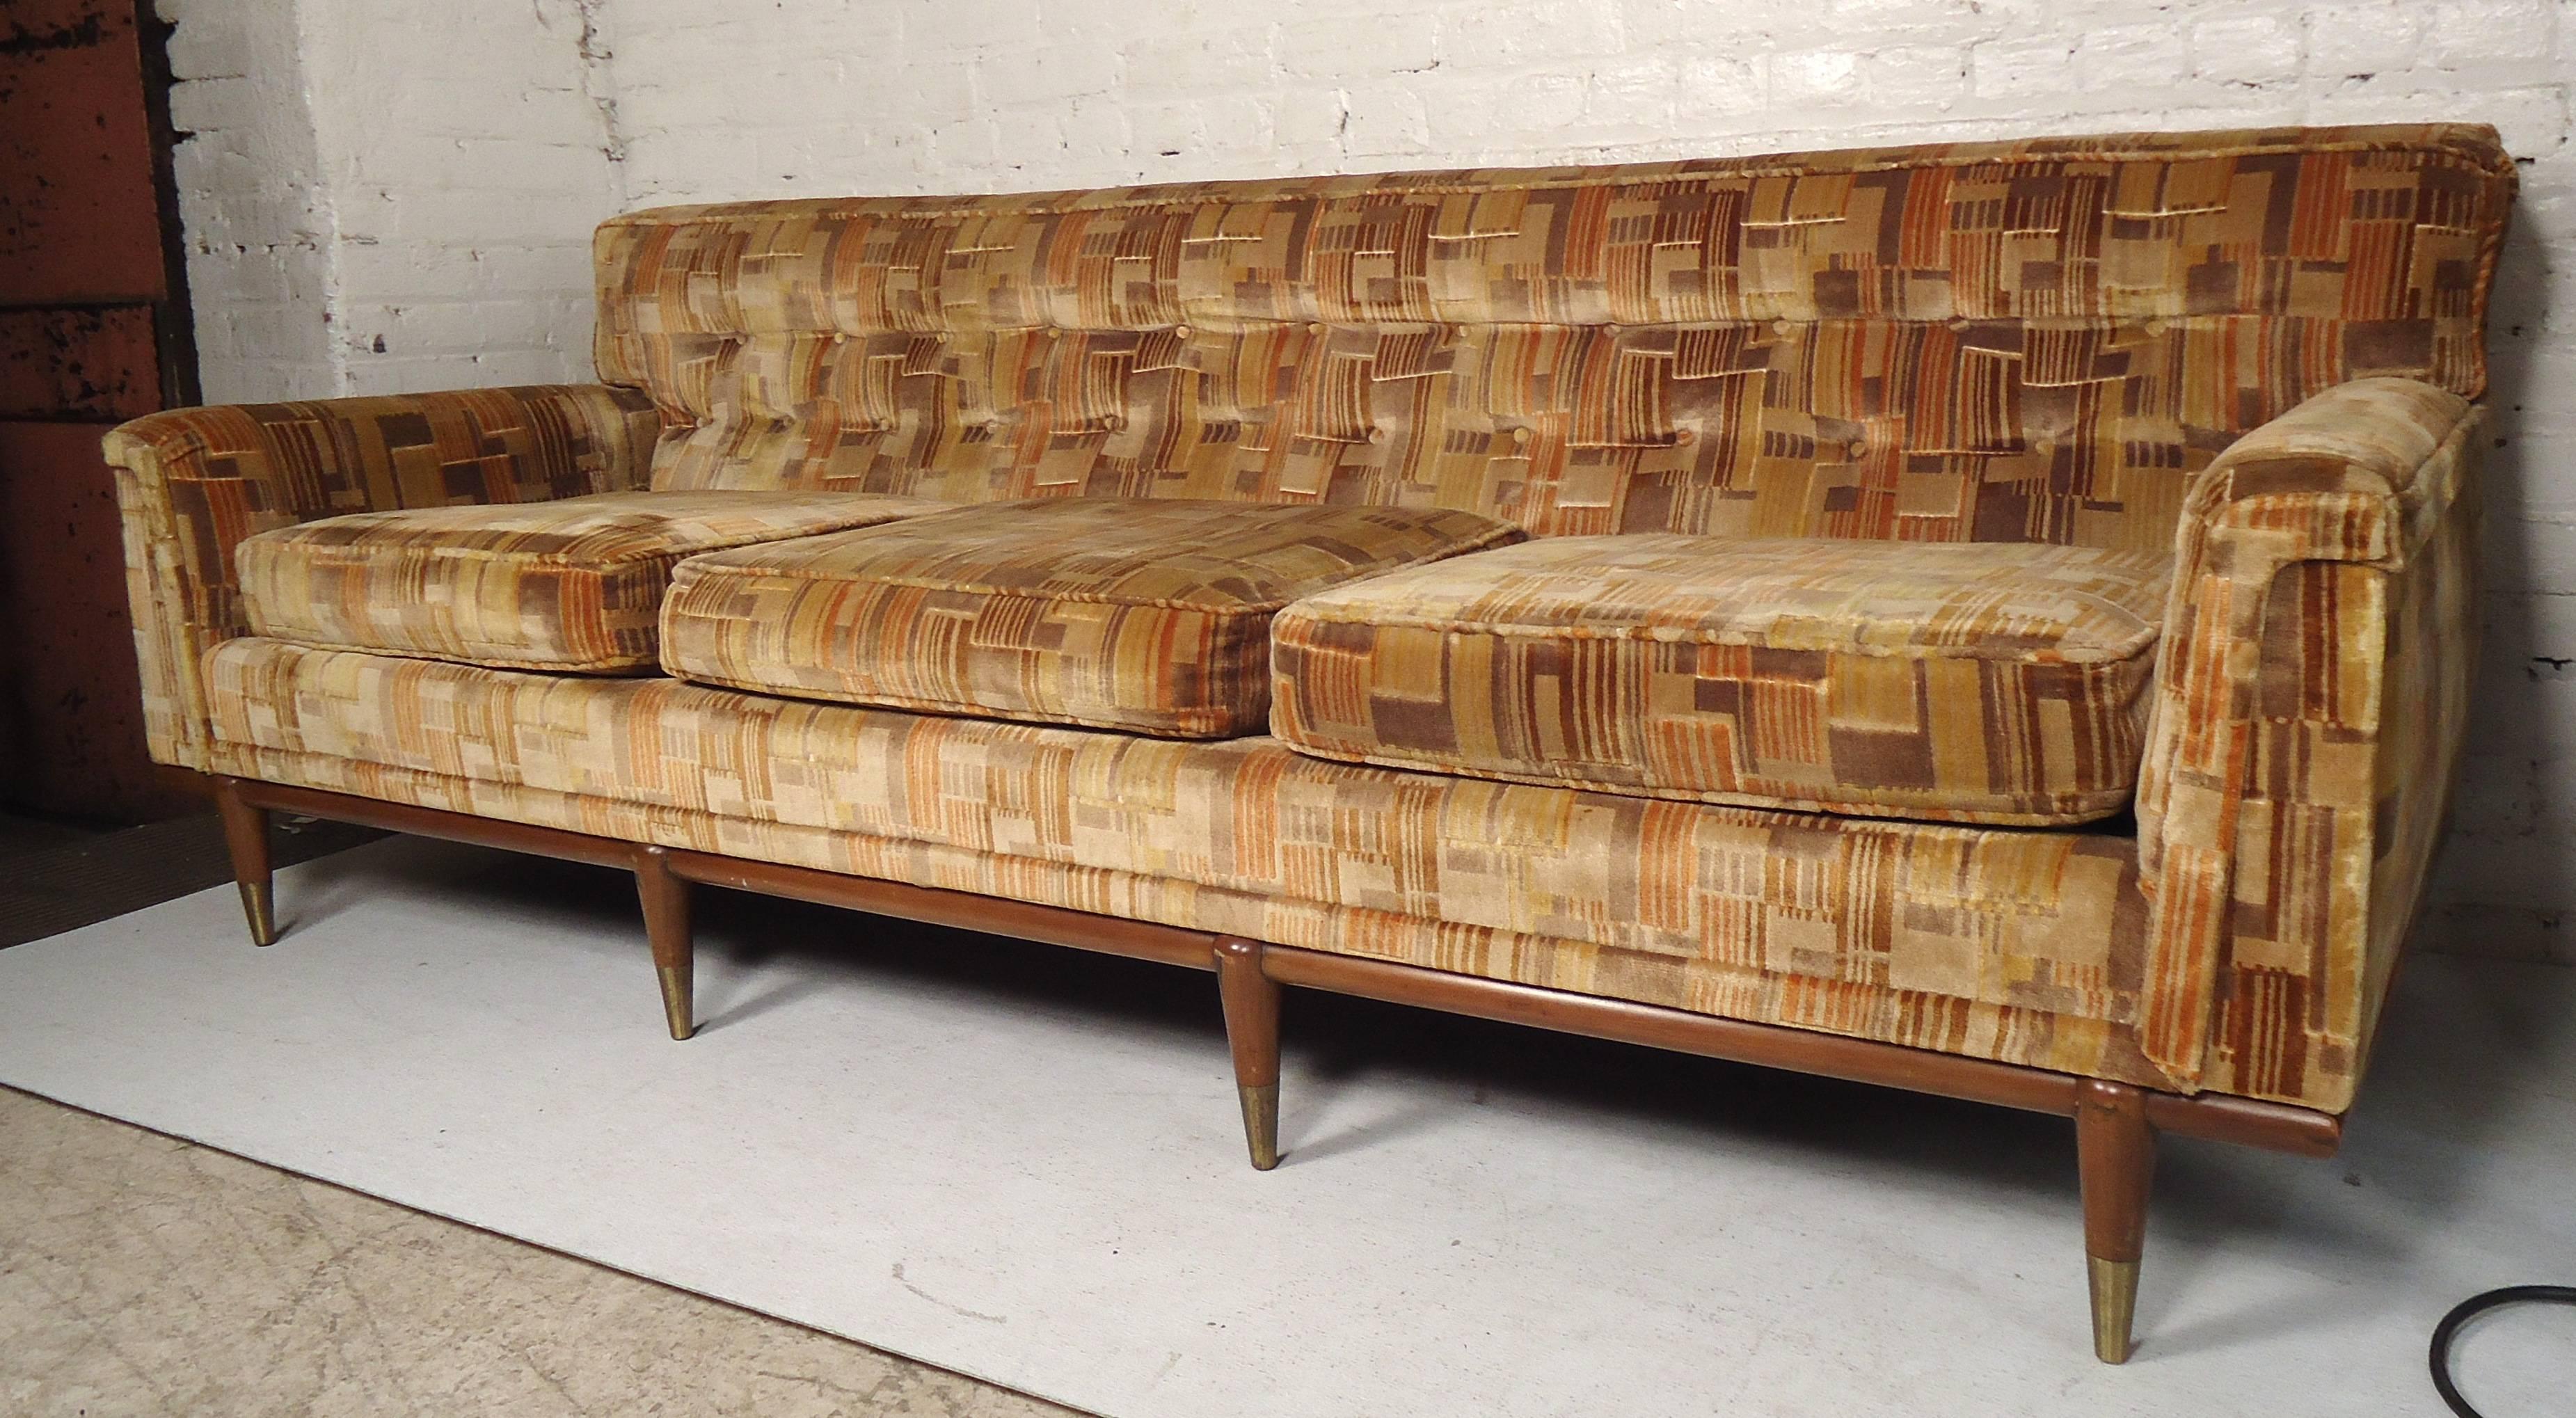 Long sofa with walnut legs and trim by John Widdicomb. Attractive brass foot caps and tufted back.

(Please confirm item location NY or NJ with dealer).
 